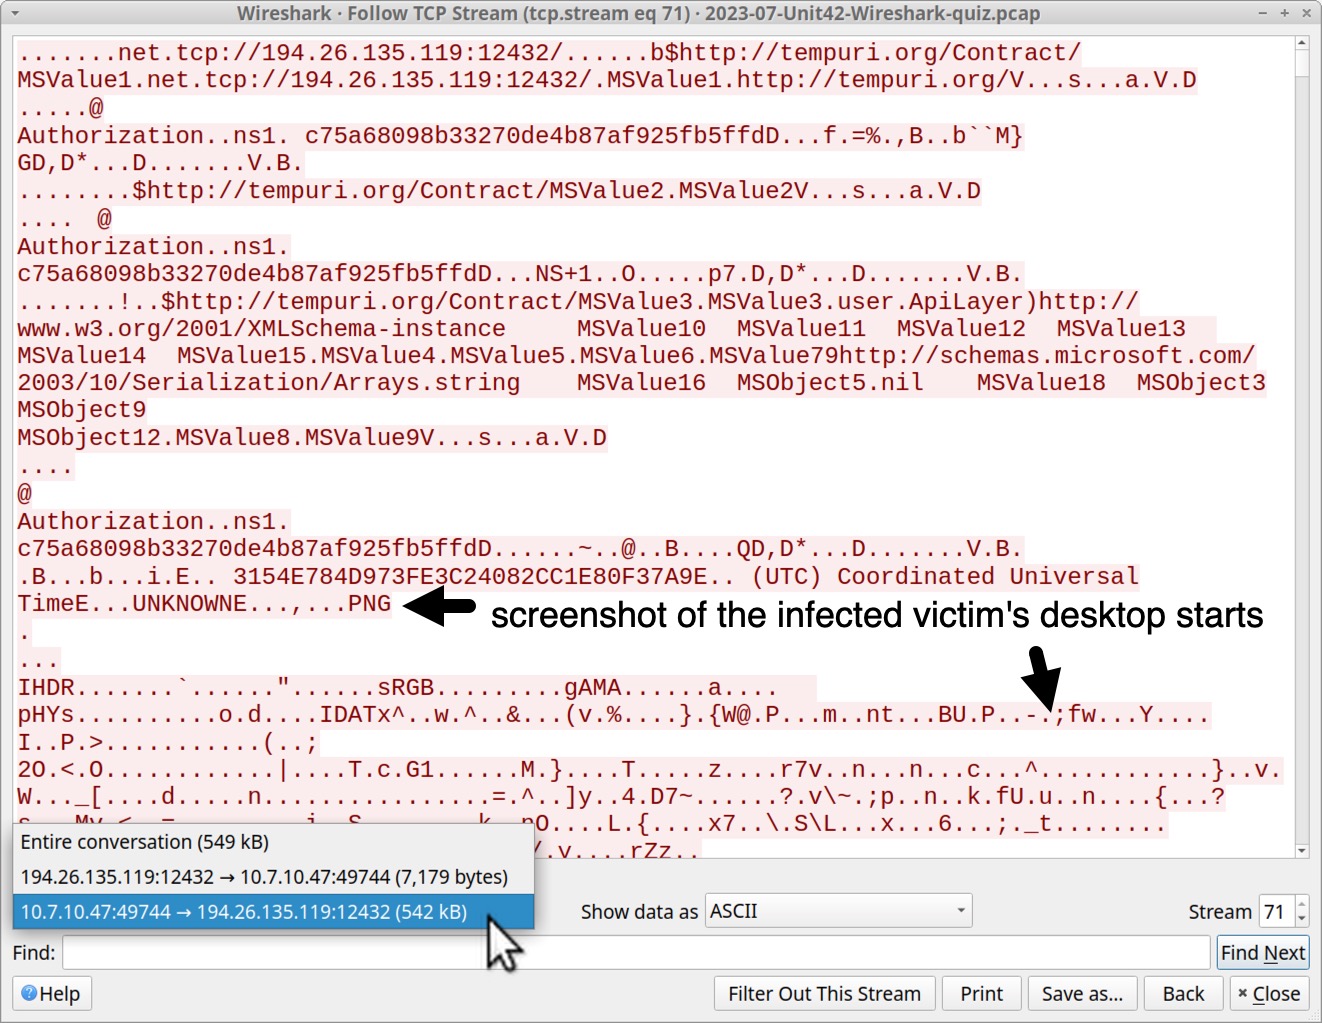 Image 13 is a screenshot of the TCP stream window in Wireshark. There is an option to select an entire conversation or two other options of various file sizes, and the final third option one is selected. The black arrow pointing to the left indicates the part of the data that is a screenshot of the infected victim’s desktop, and where it starts in the stream.